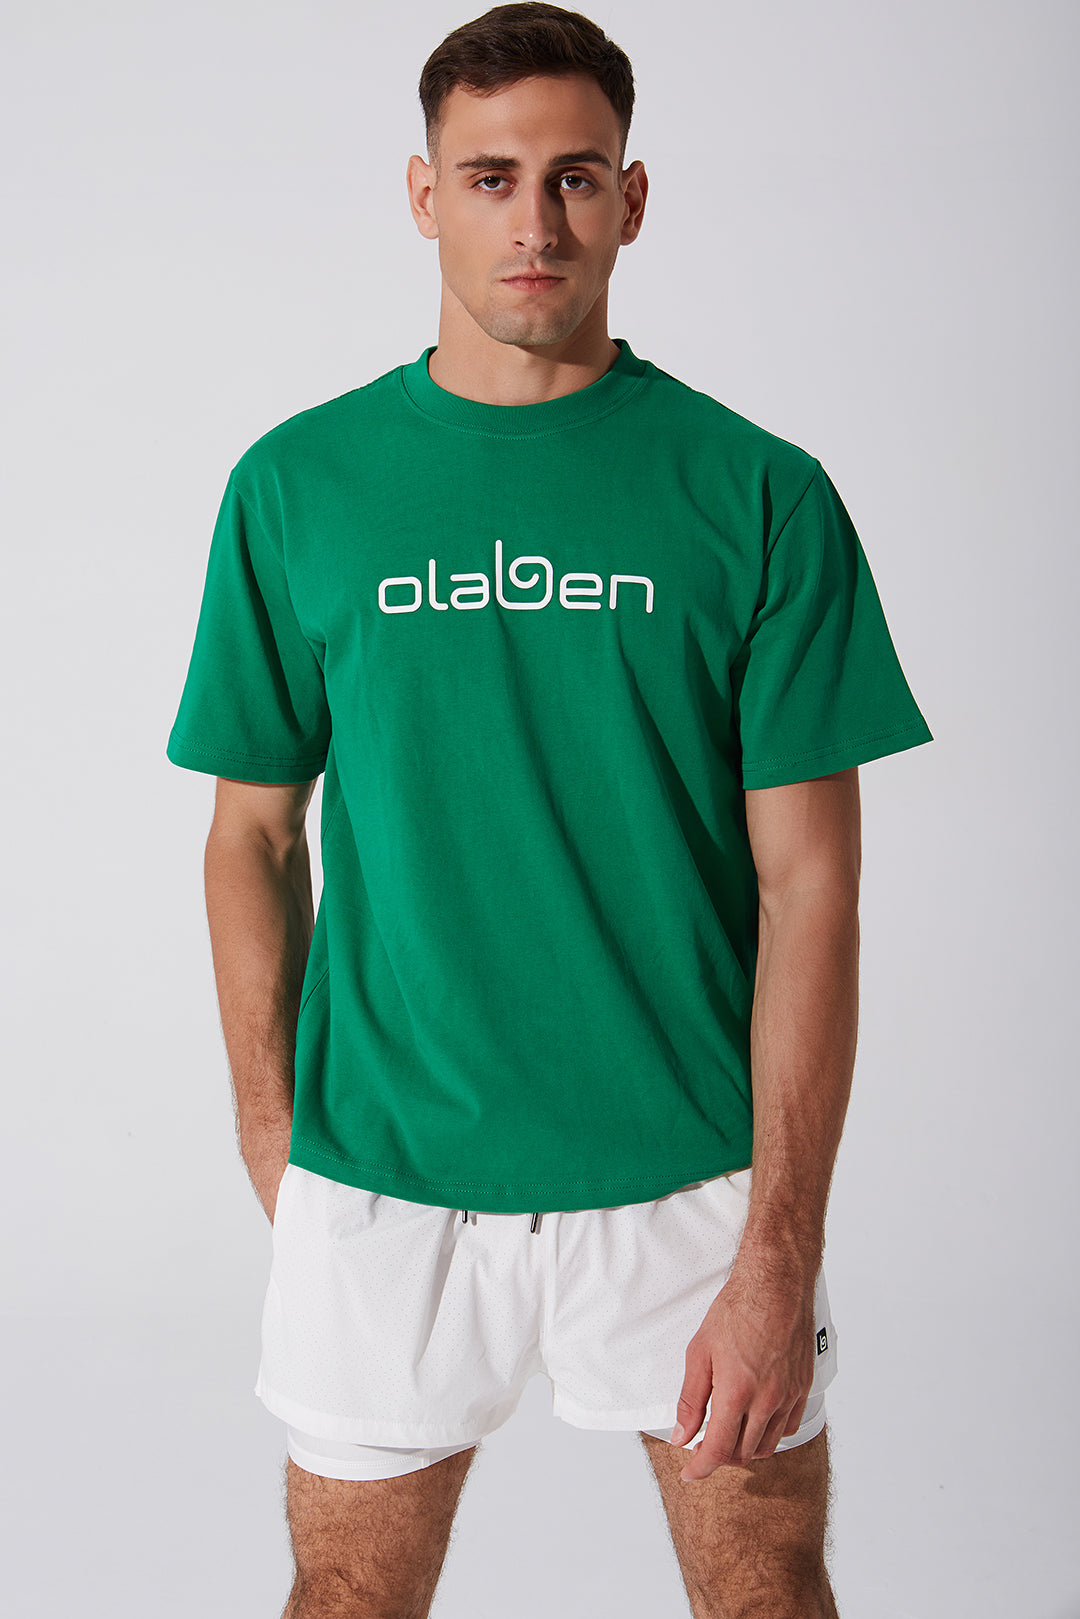 Unisex green short sleeve tee for men - limited edition - OW-0174-MSS-GN.